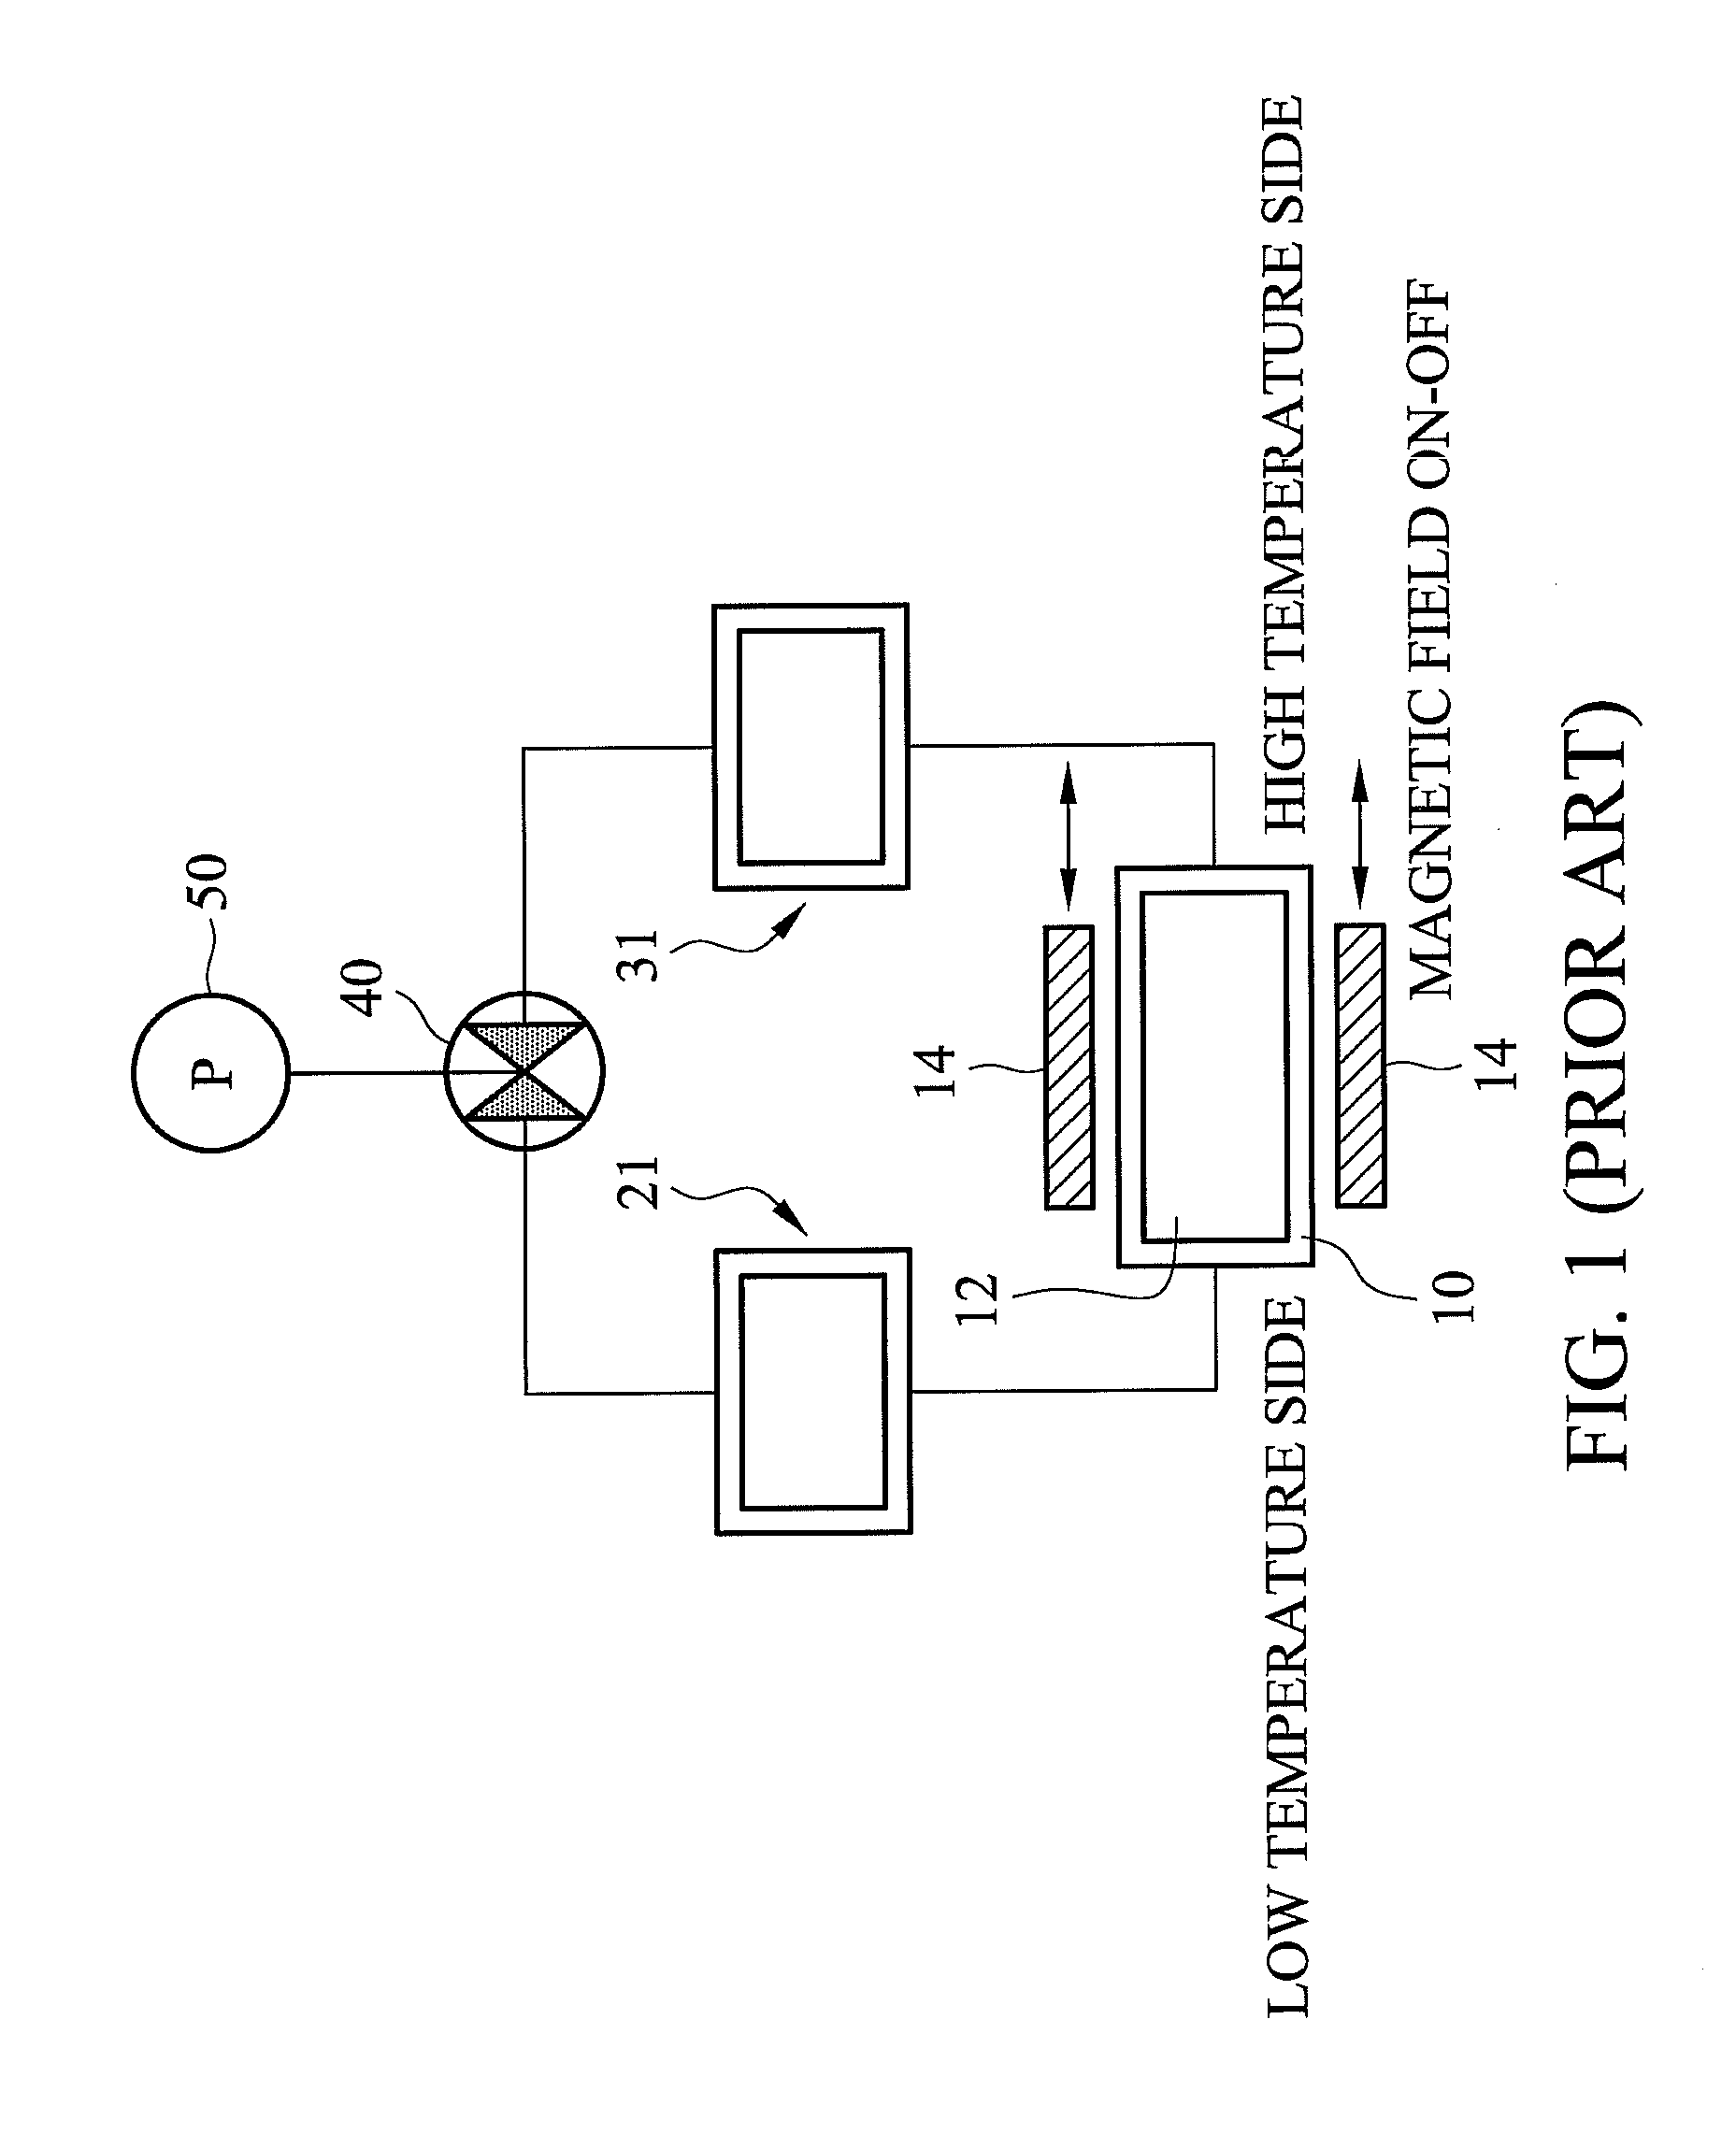 Magnetocaloric module for magnetic refrigeration apparatus